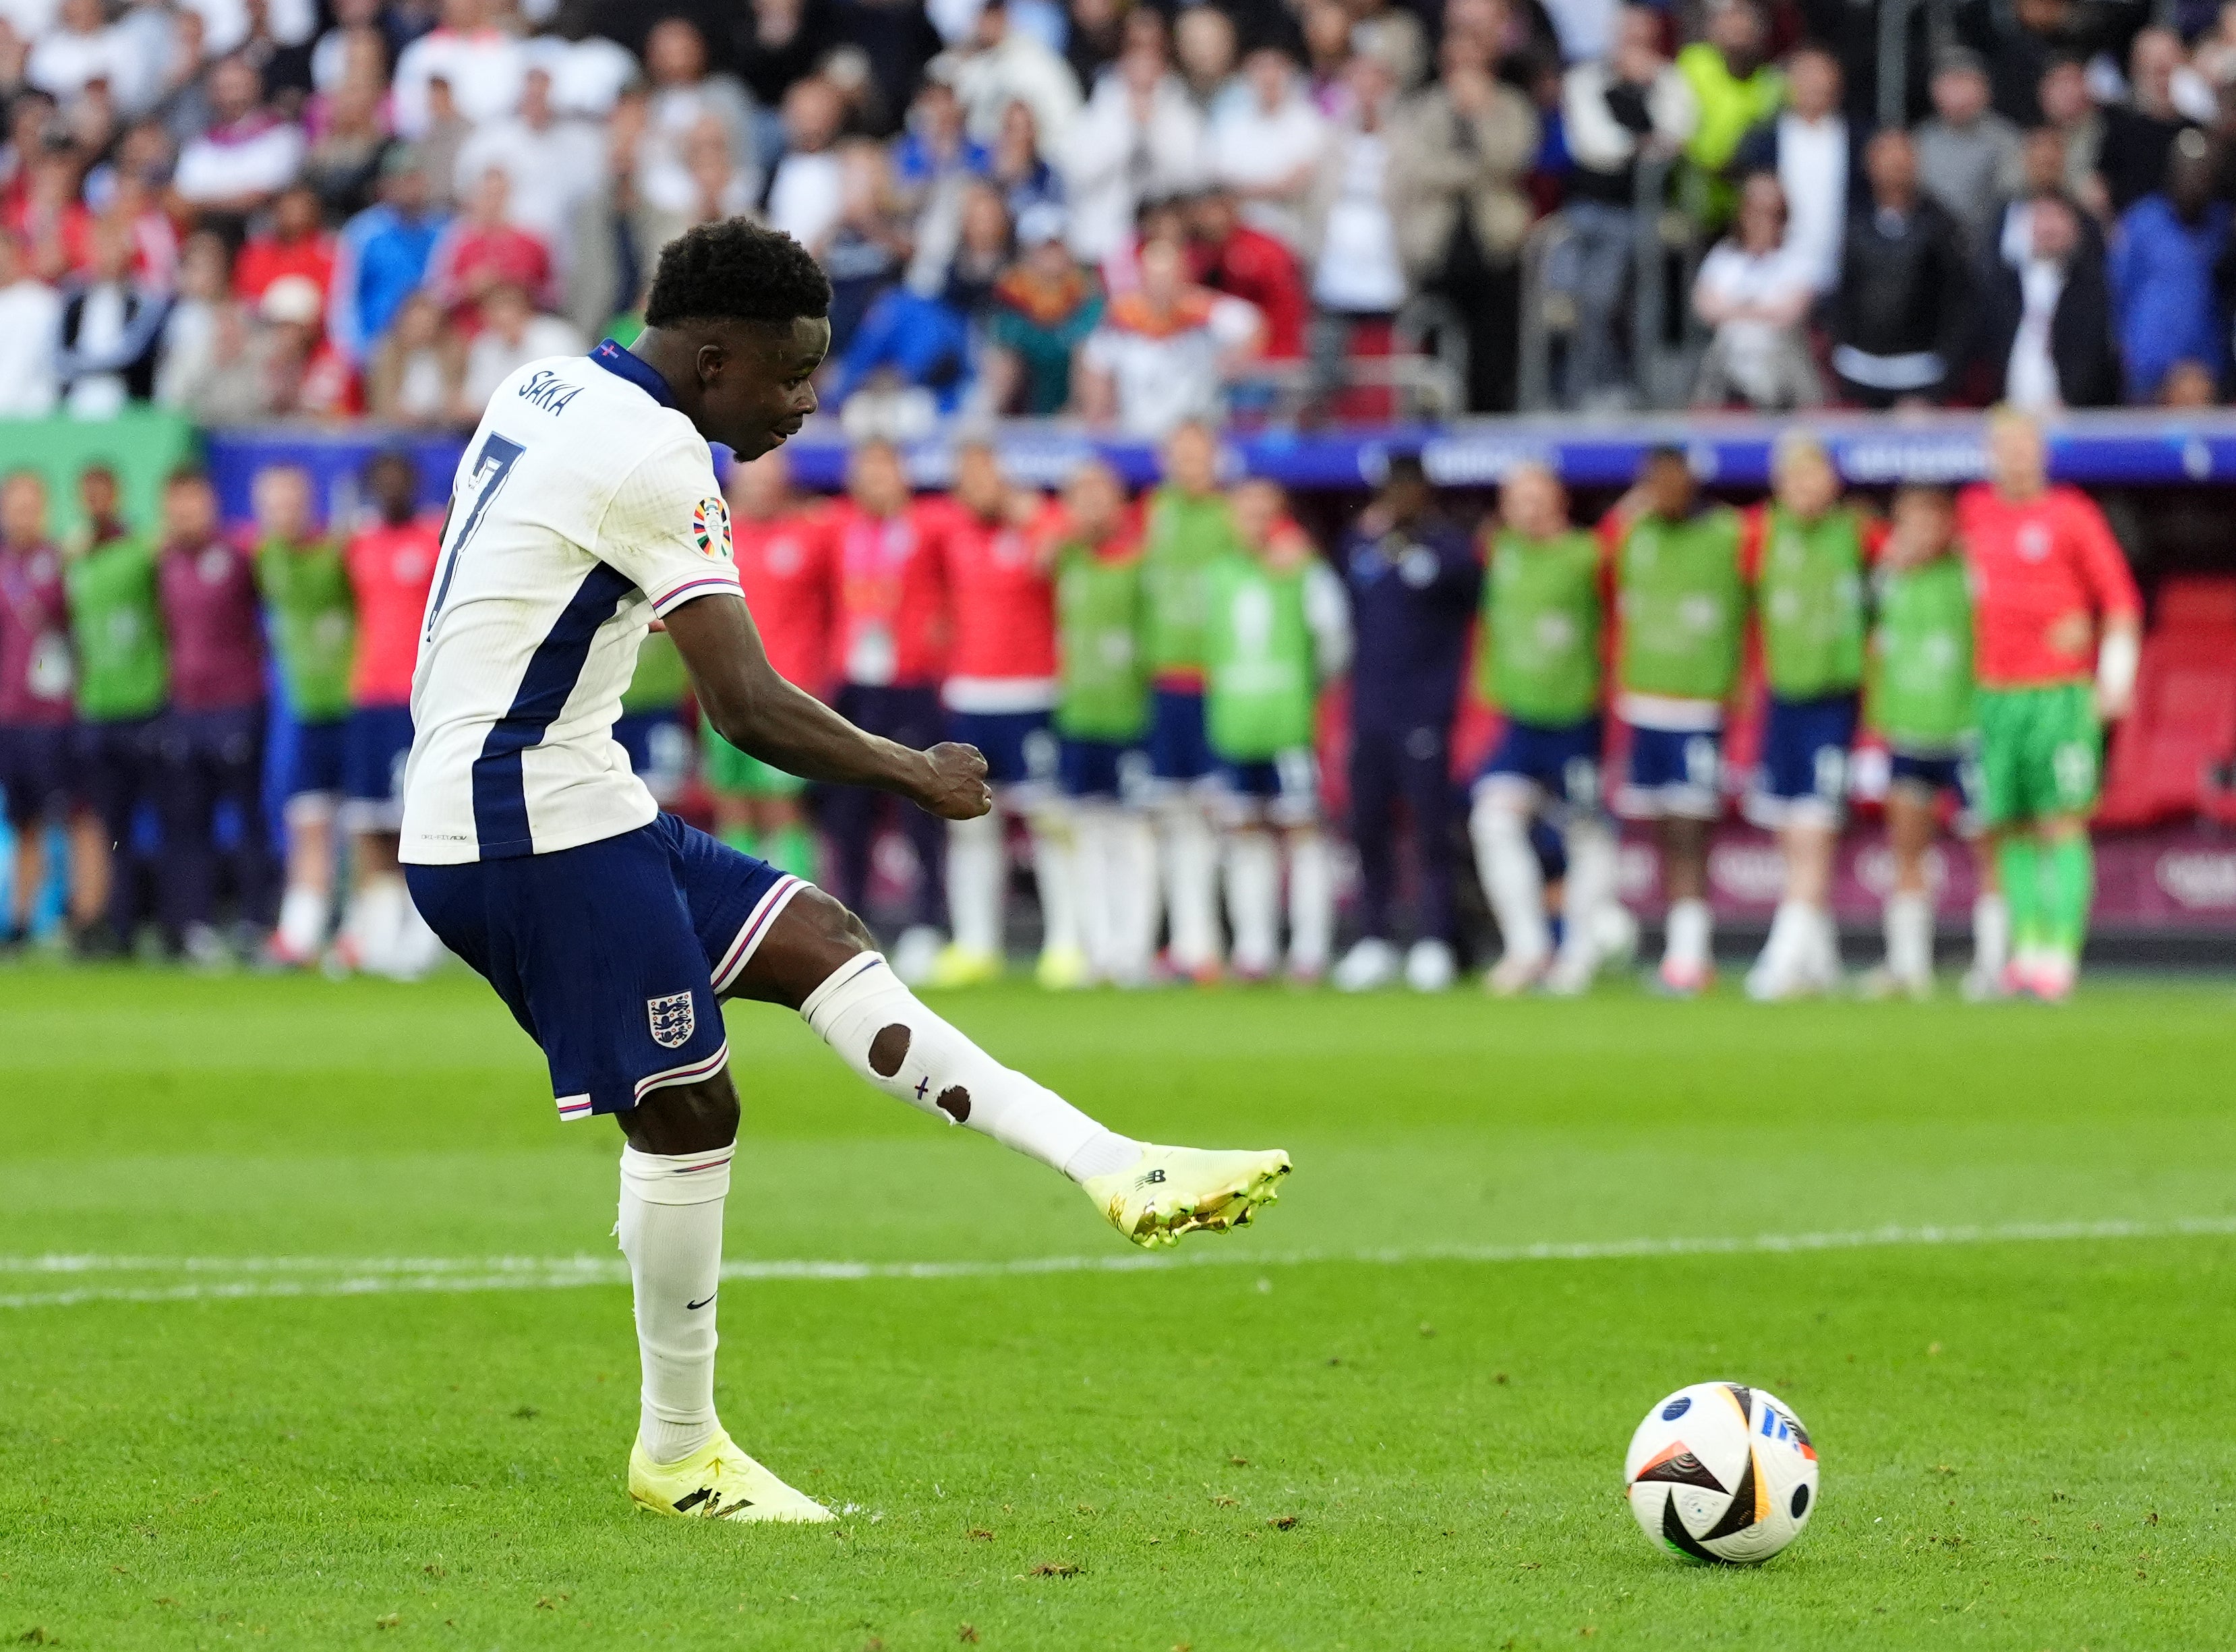 Bukayo Saka stepped up and scored for England after missing his spot-kick in the Euro 2020 final (Adam Davy/PA)